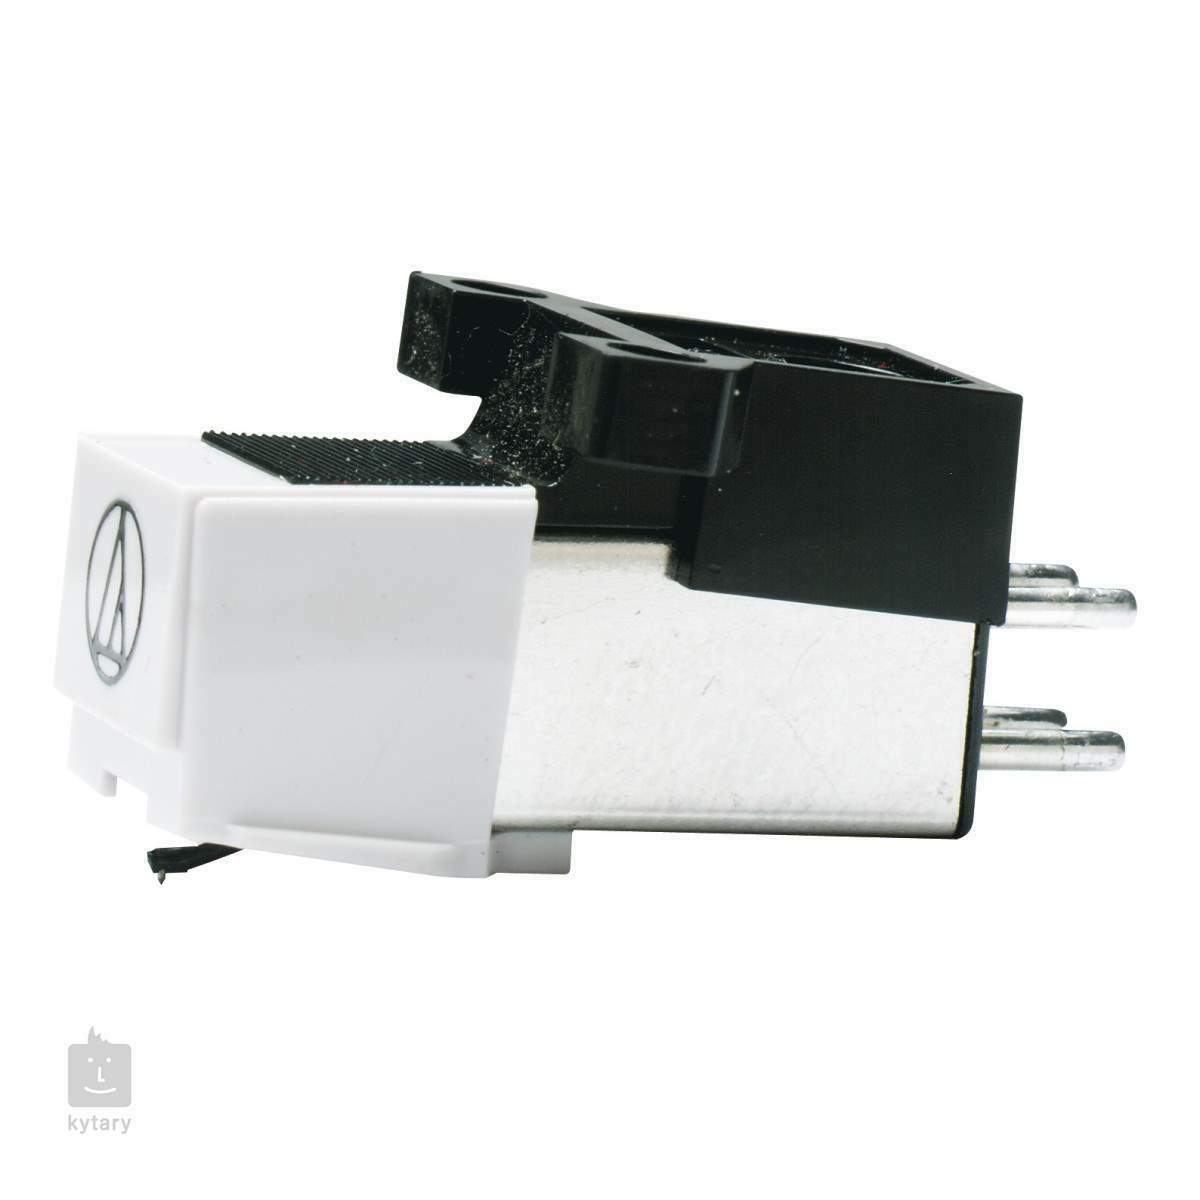 Added Audio Technica AT3600L needle cartridge high quality magne